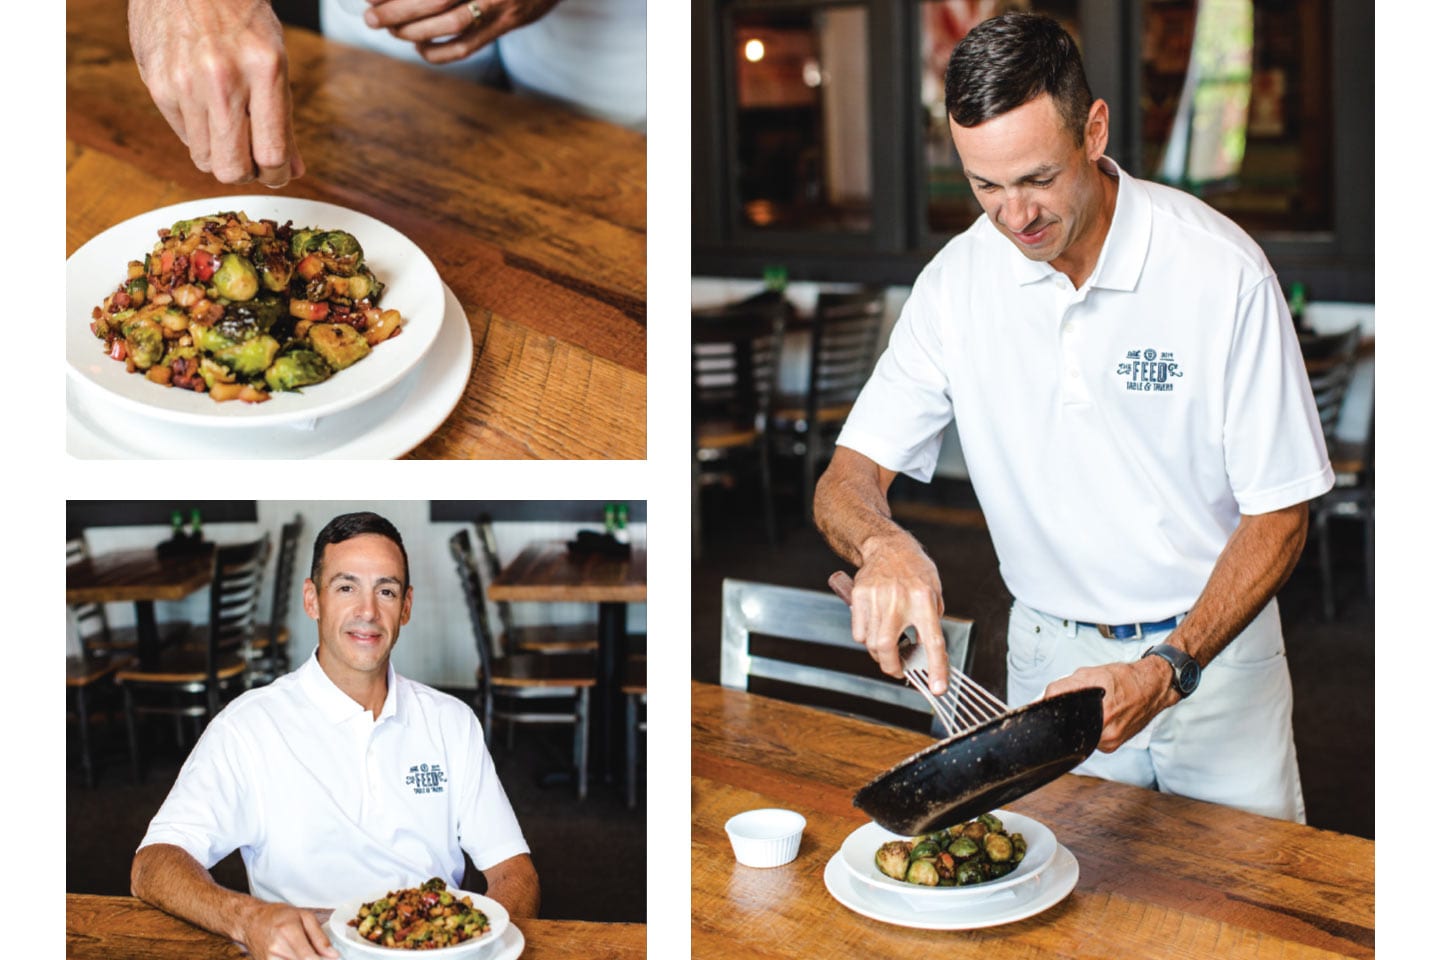 Miguel Morales, co-owner of the FEED Co. Table & Tavern makes sauteed brussels sprouts with gala apples